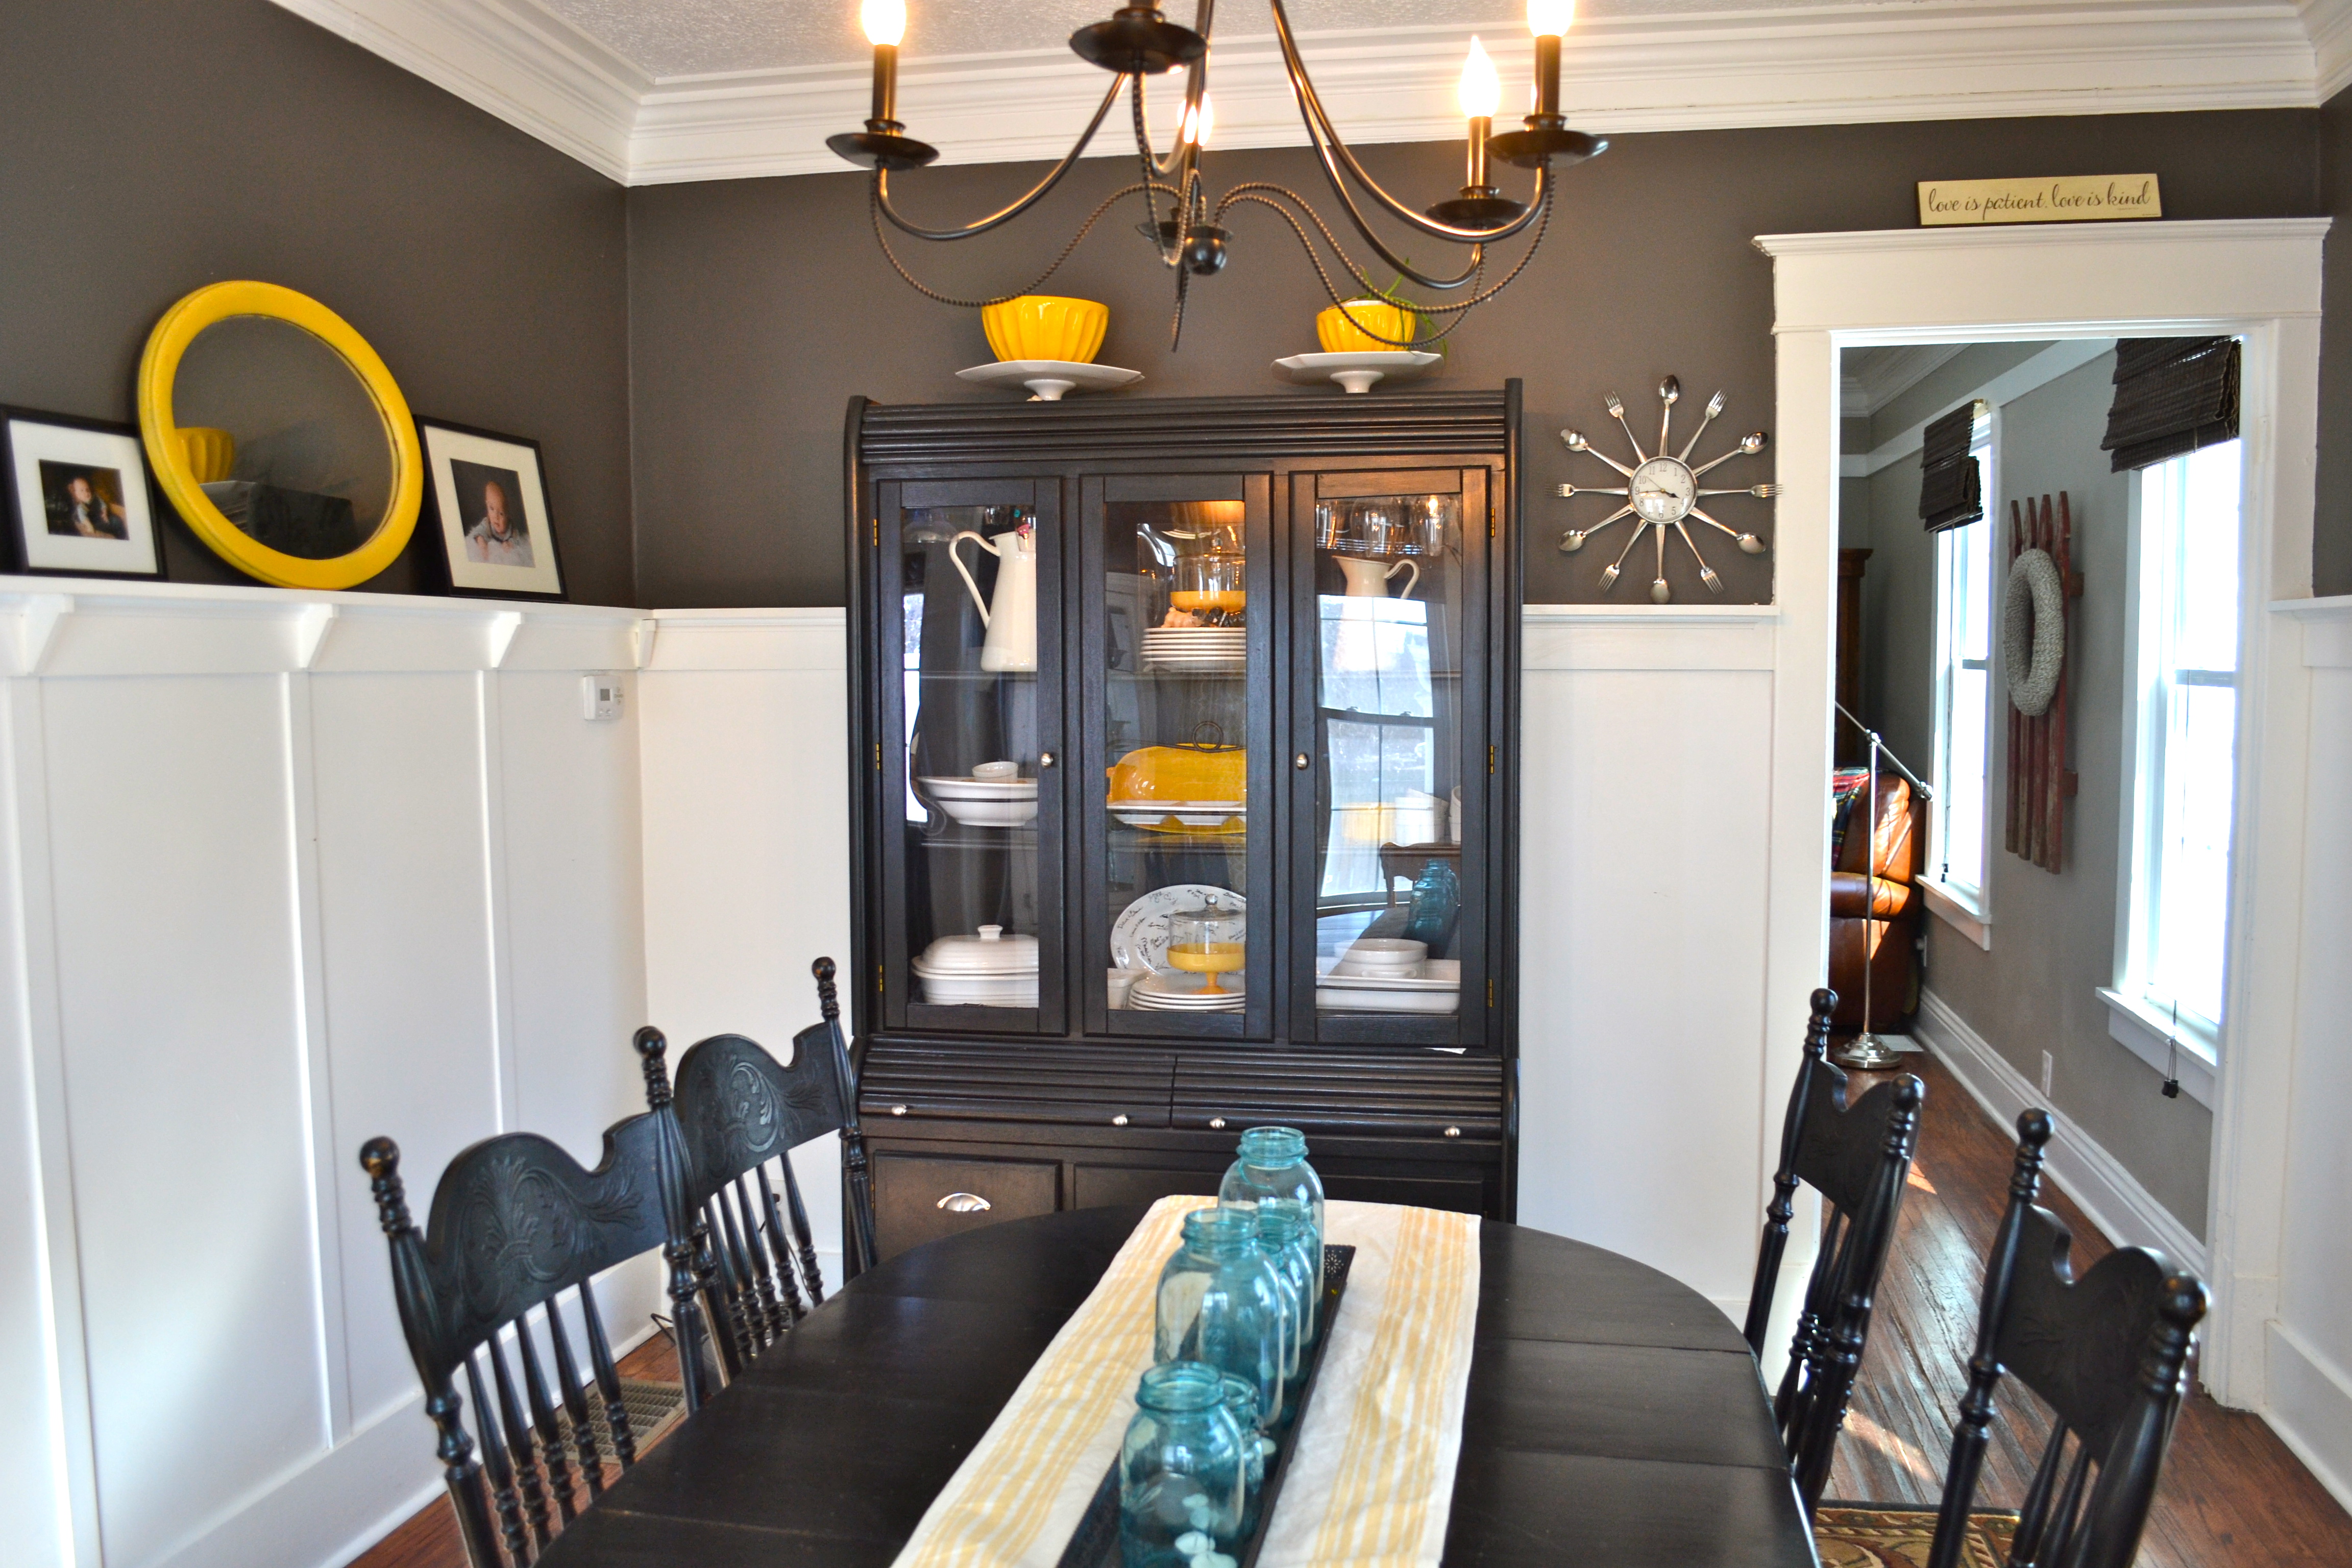 Painting A Dining Room Table Grey, Painting Dining Room Chairs Black